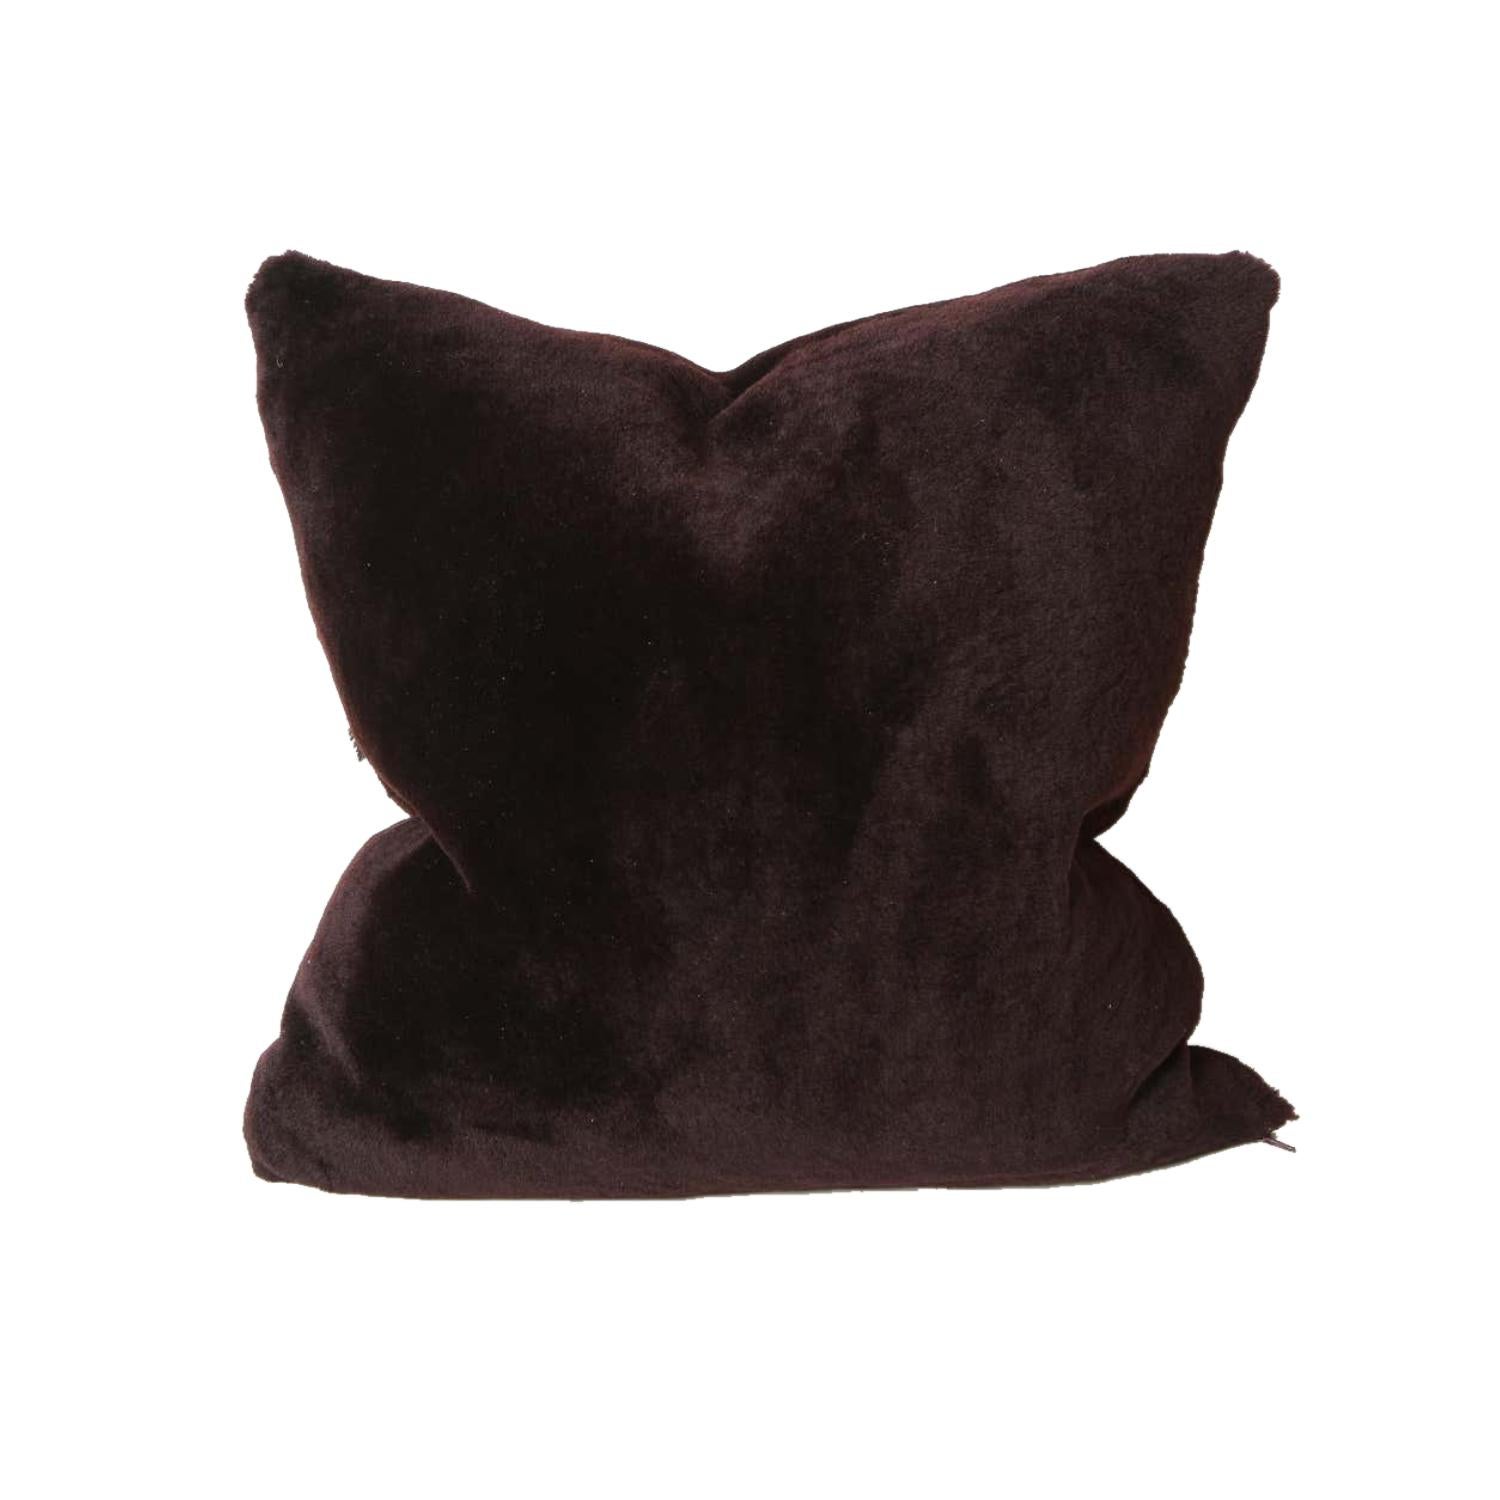 Double sided Merino short hair shearling pillow in deep plum color. The pillow is made of genuine shearing with a zipper enclosure in a matching color.